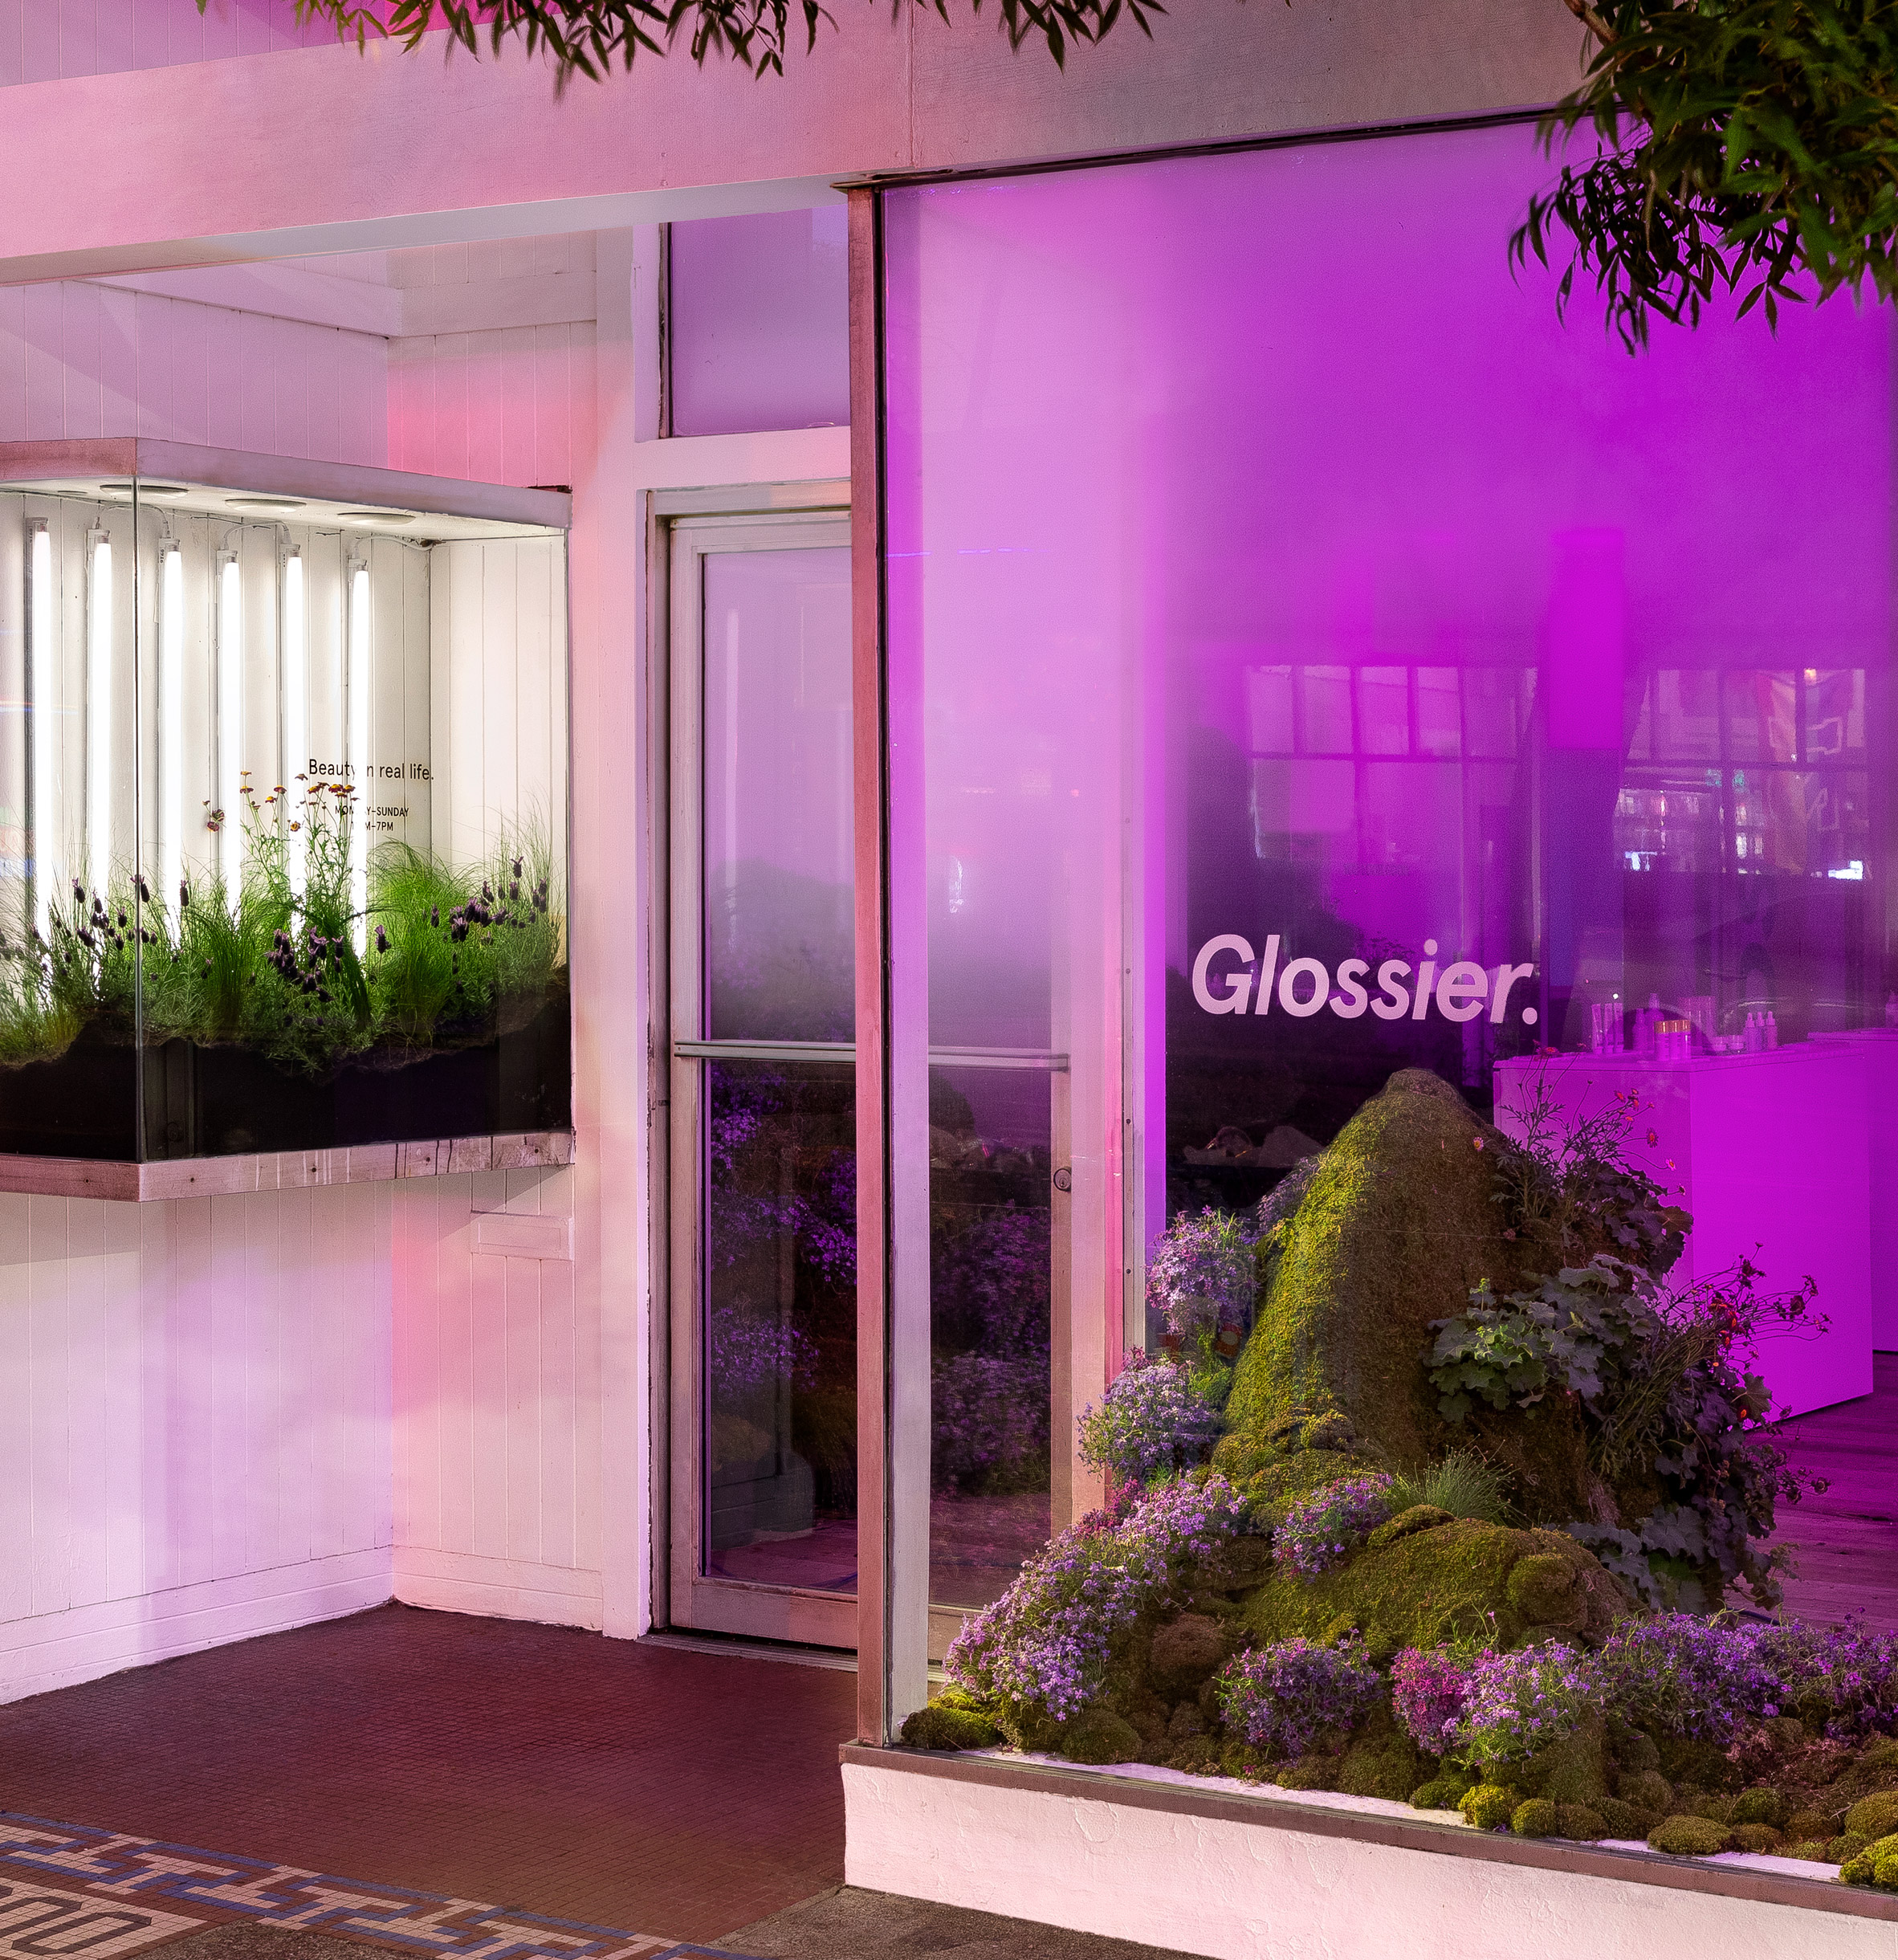 Glossier pop-up shop in Seattle, Washington, by Glossier Experiential Team and Studio Lily Kwong